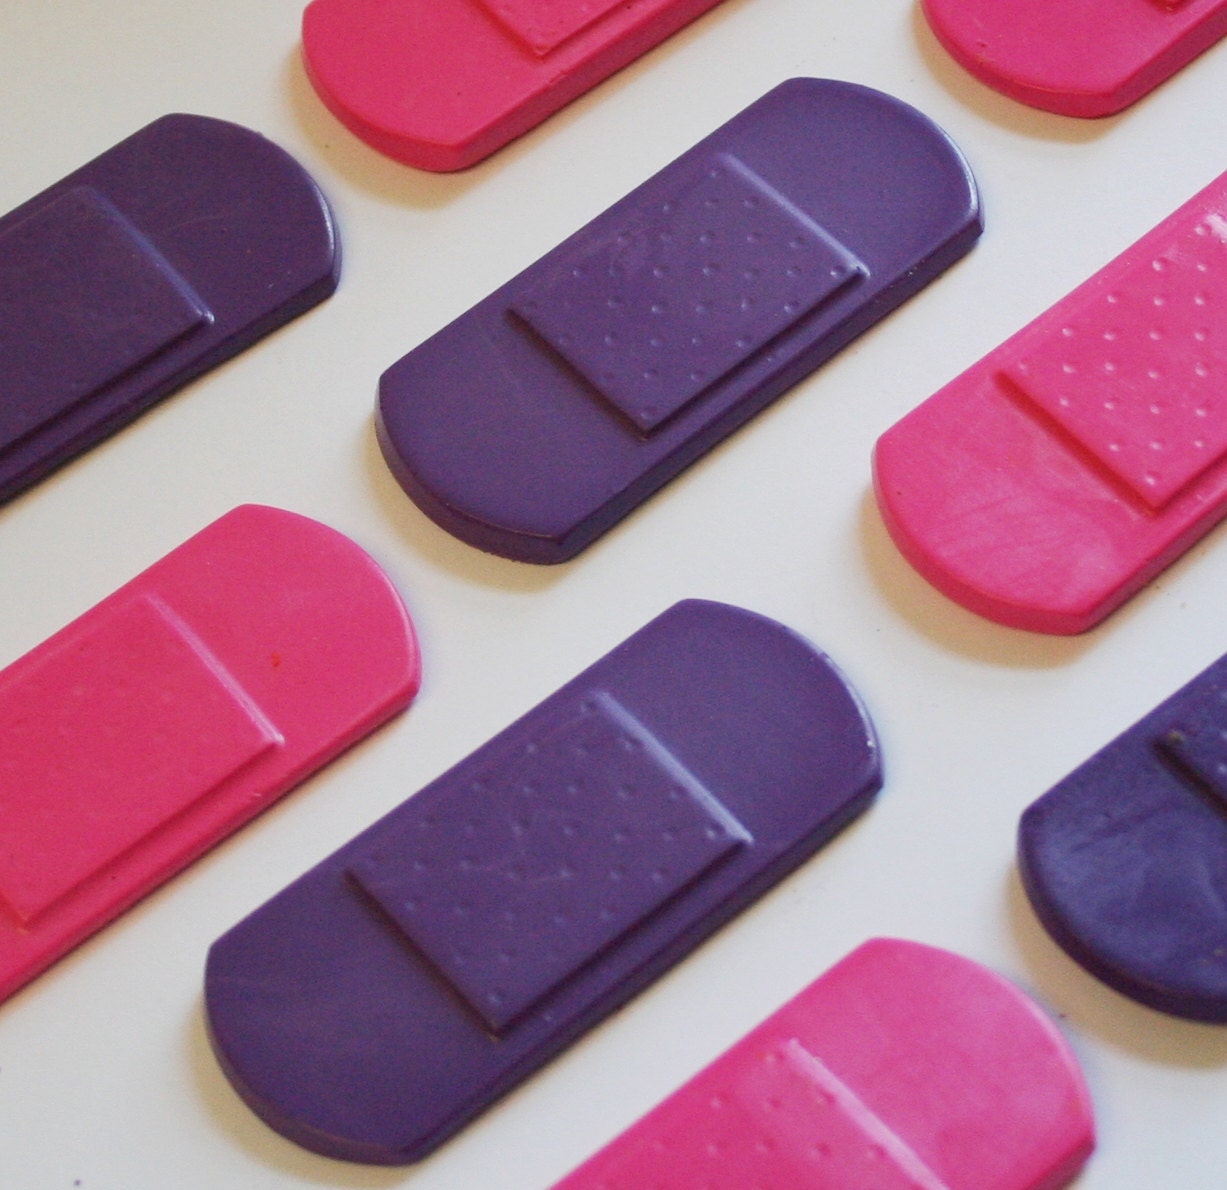 Bandage Crayons - Set of 8 (4 Pink and 4 Light Purple) - Great for a Doc McStuffins Party